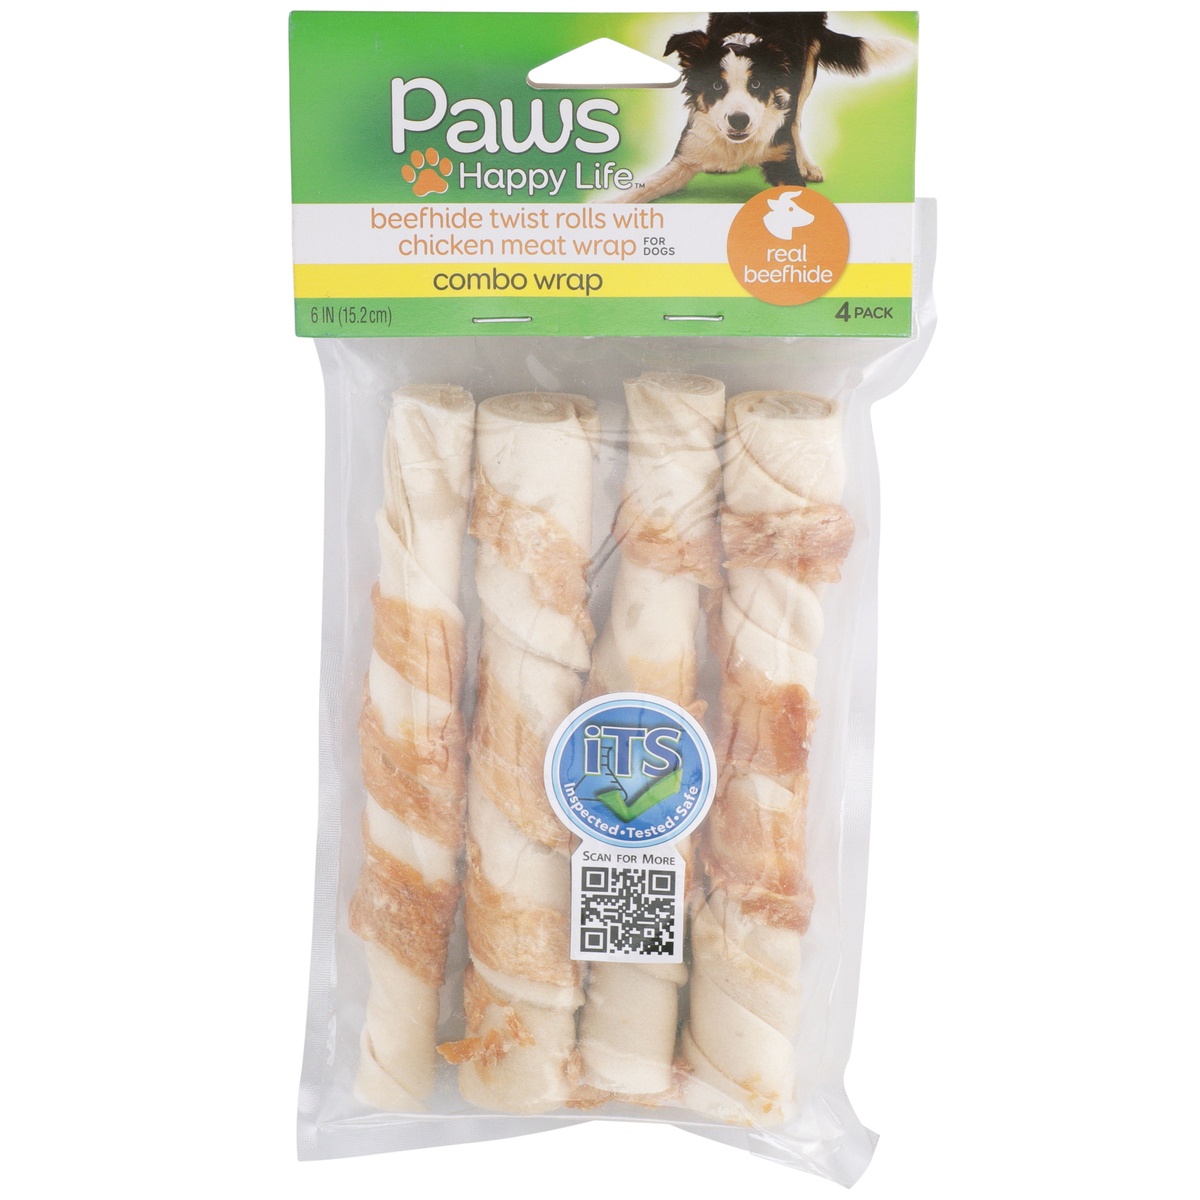 slide 1 of 8, Paws Happy Life Combo Wrap Beefhide Twist Rolls With Chicken Meat Wrap For Dogs, 4 ct